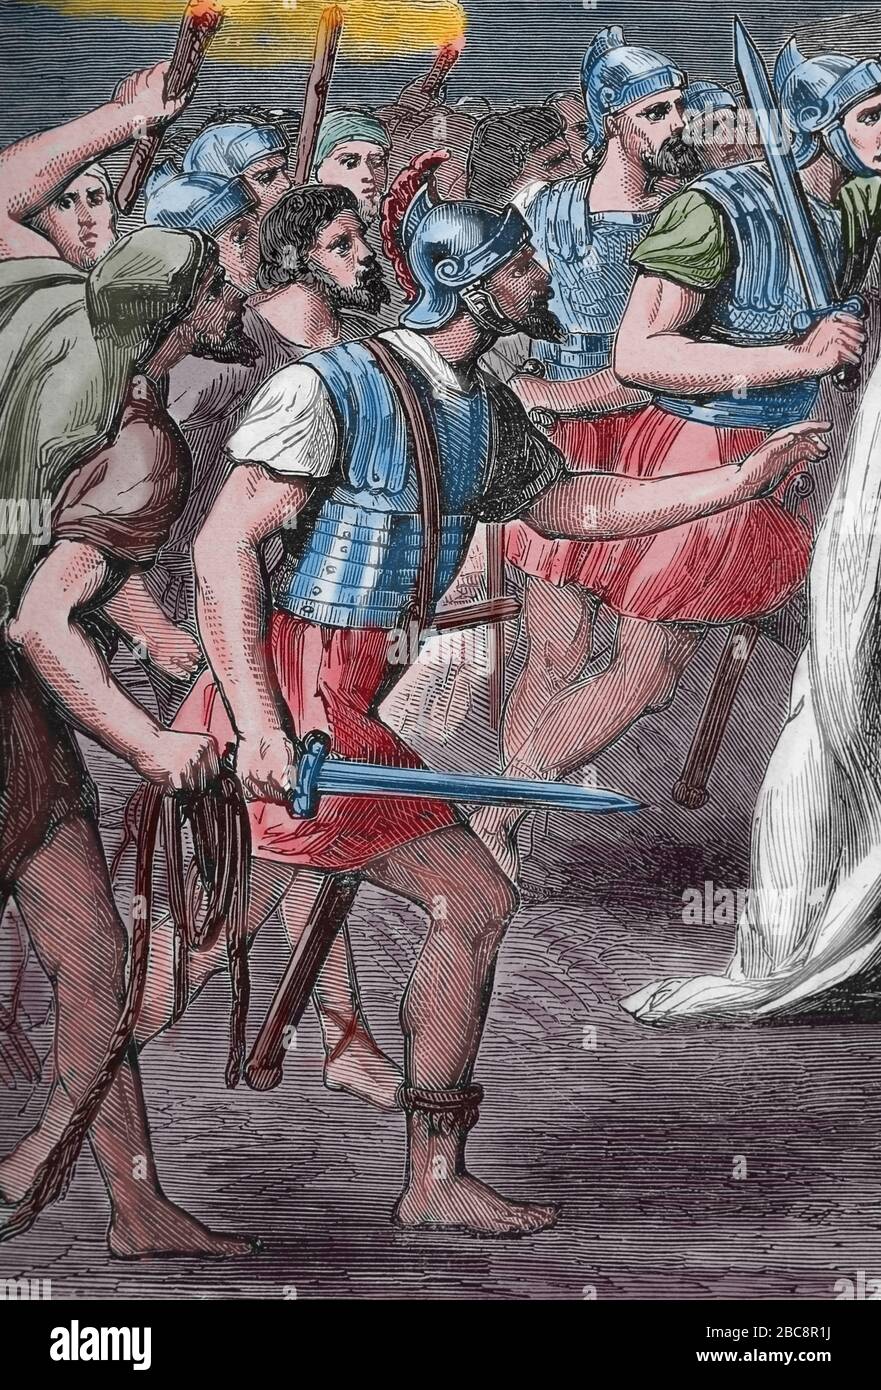 The arrest of Jesus in the Garden of Gethsemane. Detail of a roman soldier. Engraving. Holy Bible, 19th century. Stock Photo